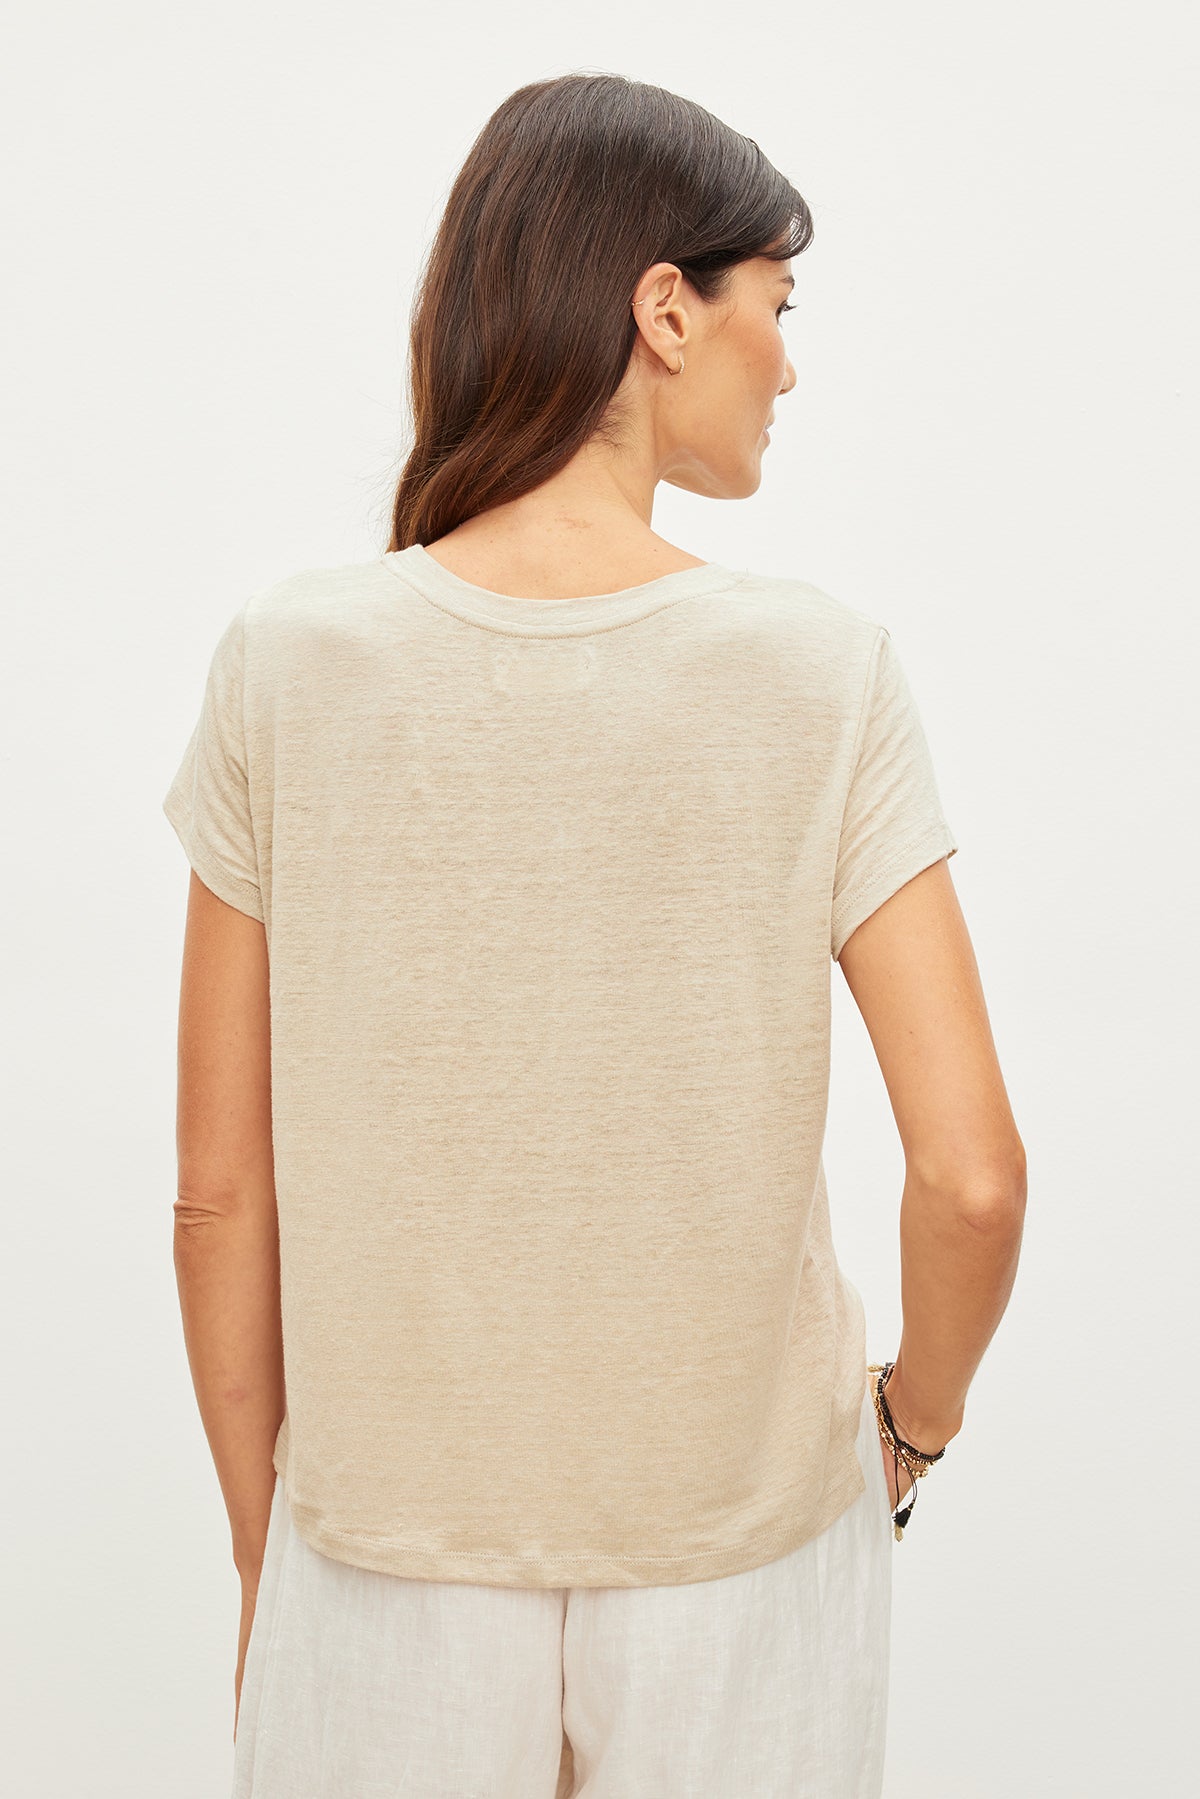 The back view of a woman wearing the Casey Linen Knit Crew Neck Tee in beige, a must-have wardrobe essential by Velvet by Graham & Spencer.-35955505955009